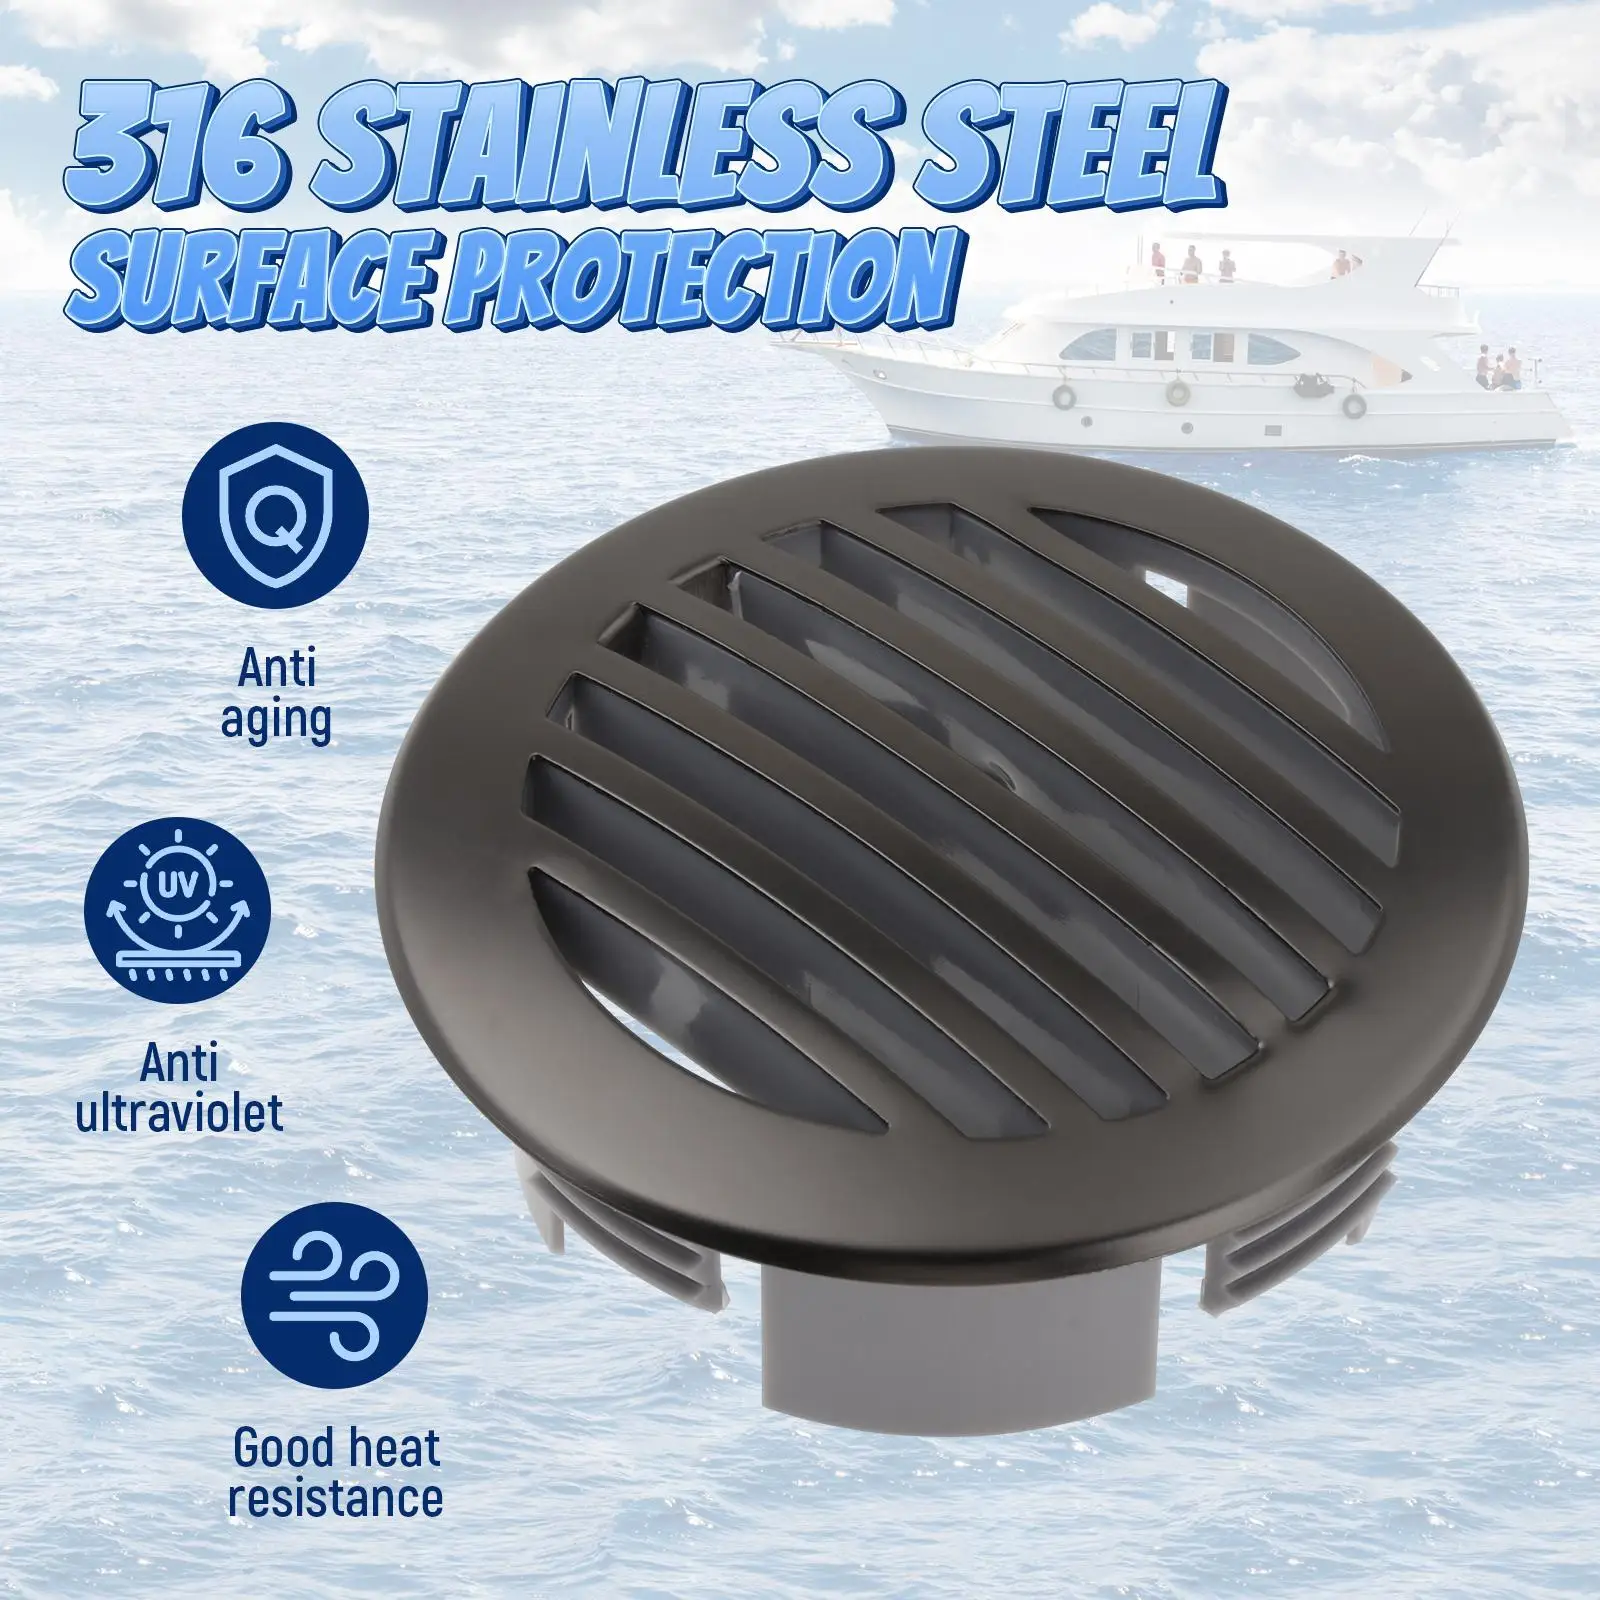 Grill Airflow Vent Cover 3.5inch 316 Stainless Steel Accessories Round Air Vent Grill Cover for Ships RV Boats Deck Yachts